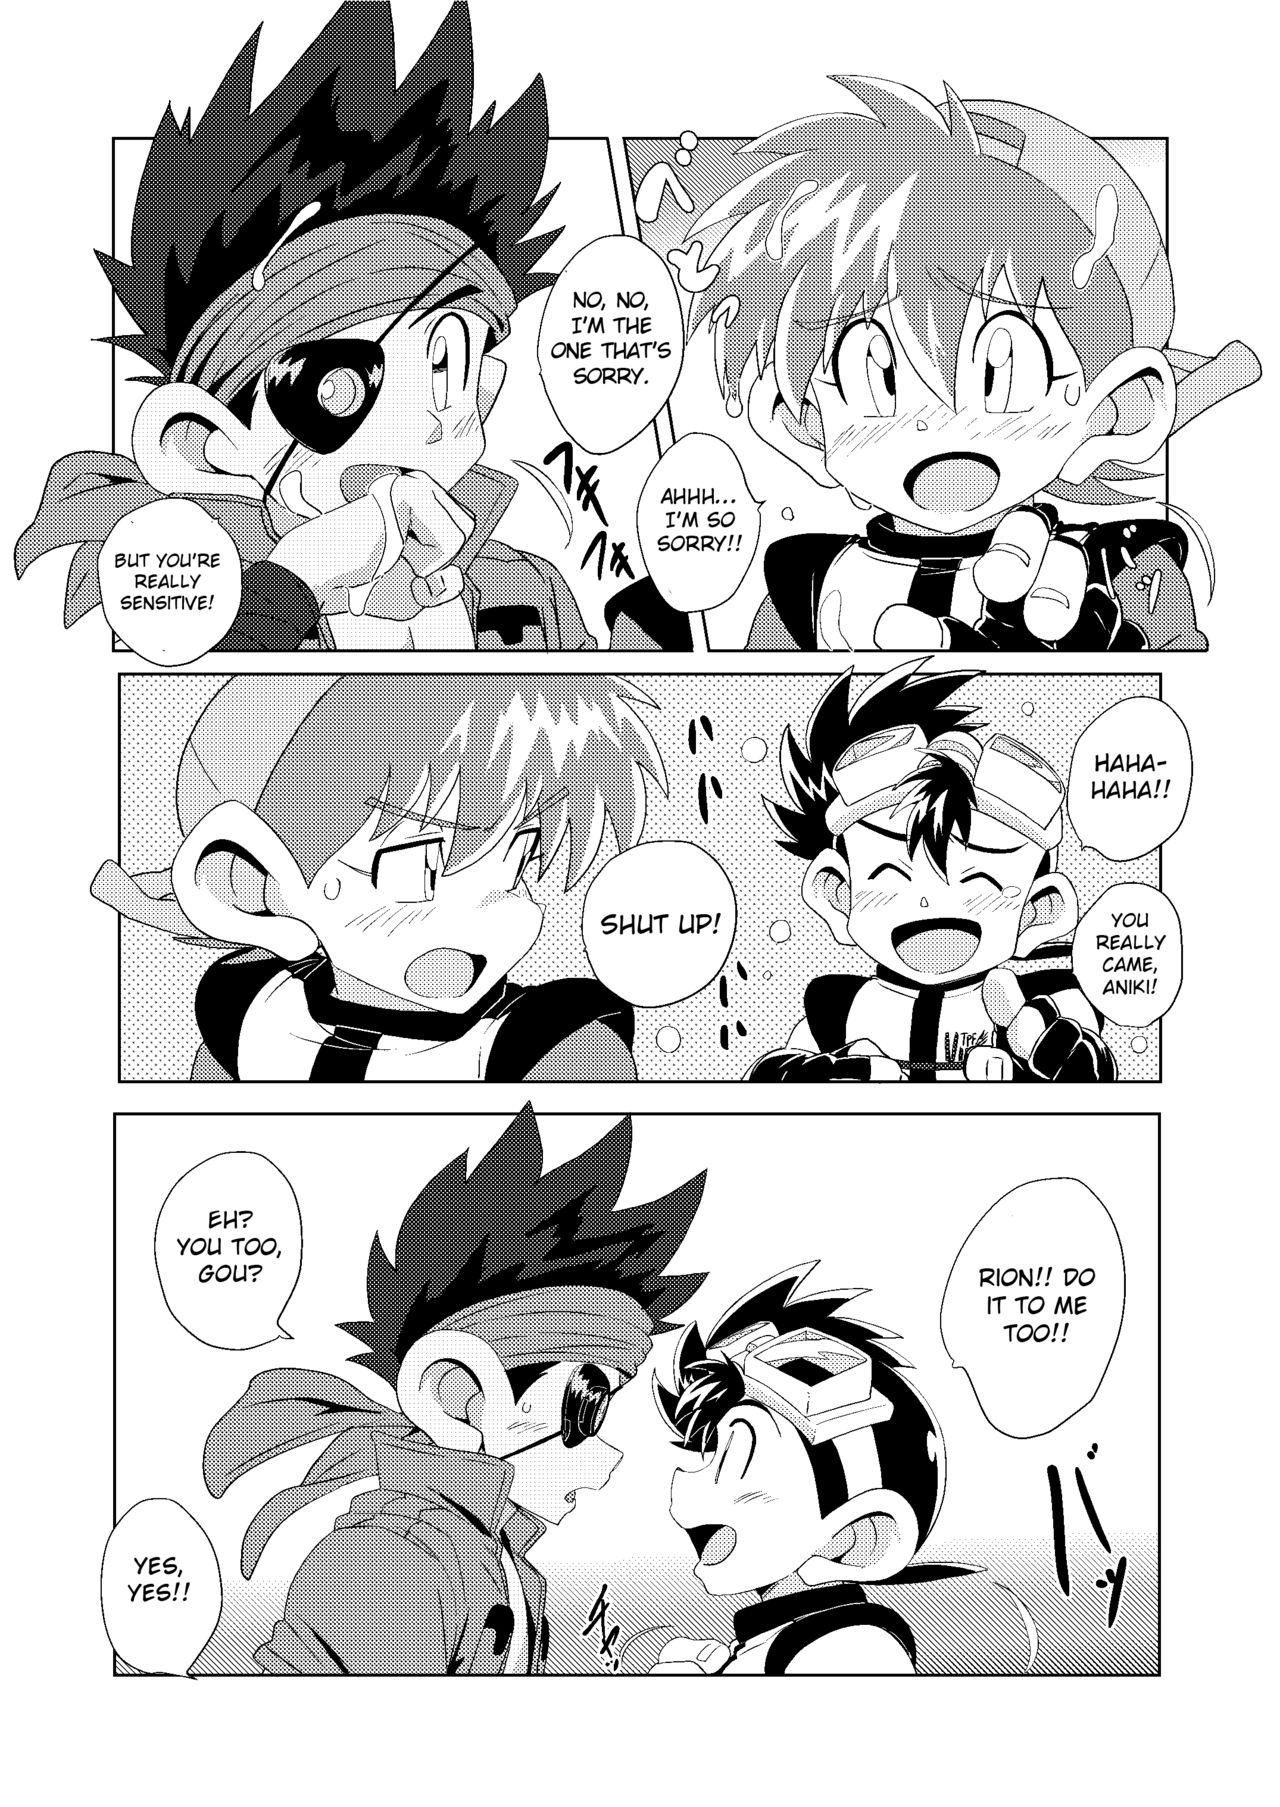 Tight Chase the Wind - Bakusou kyoudai lets and go Amature - Page 6